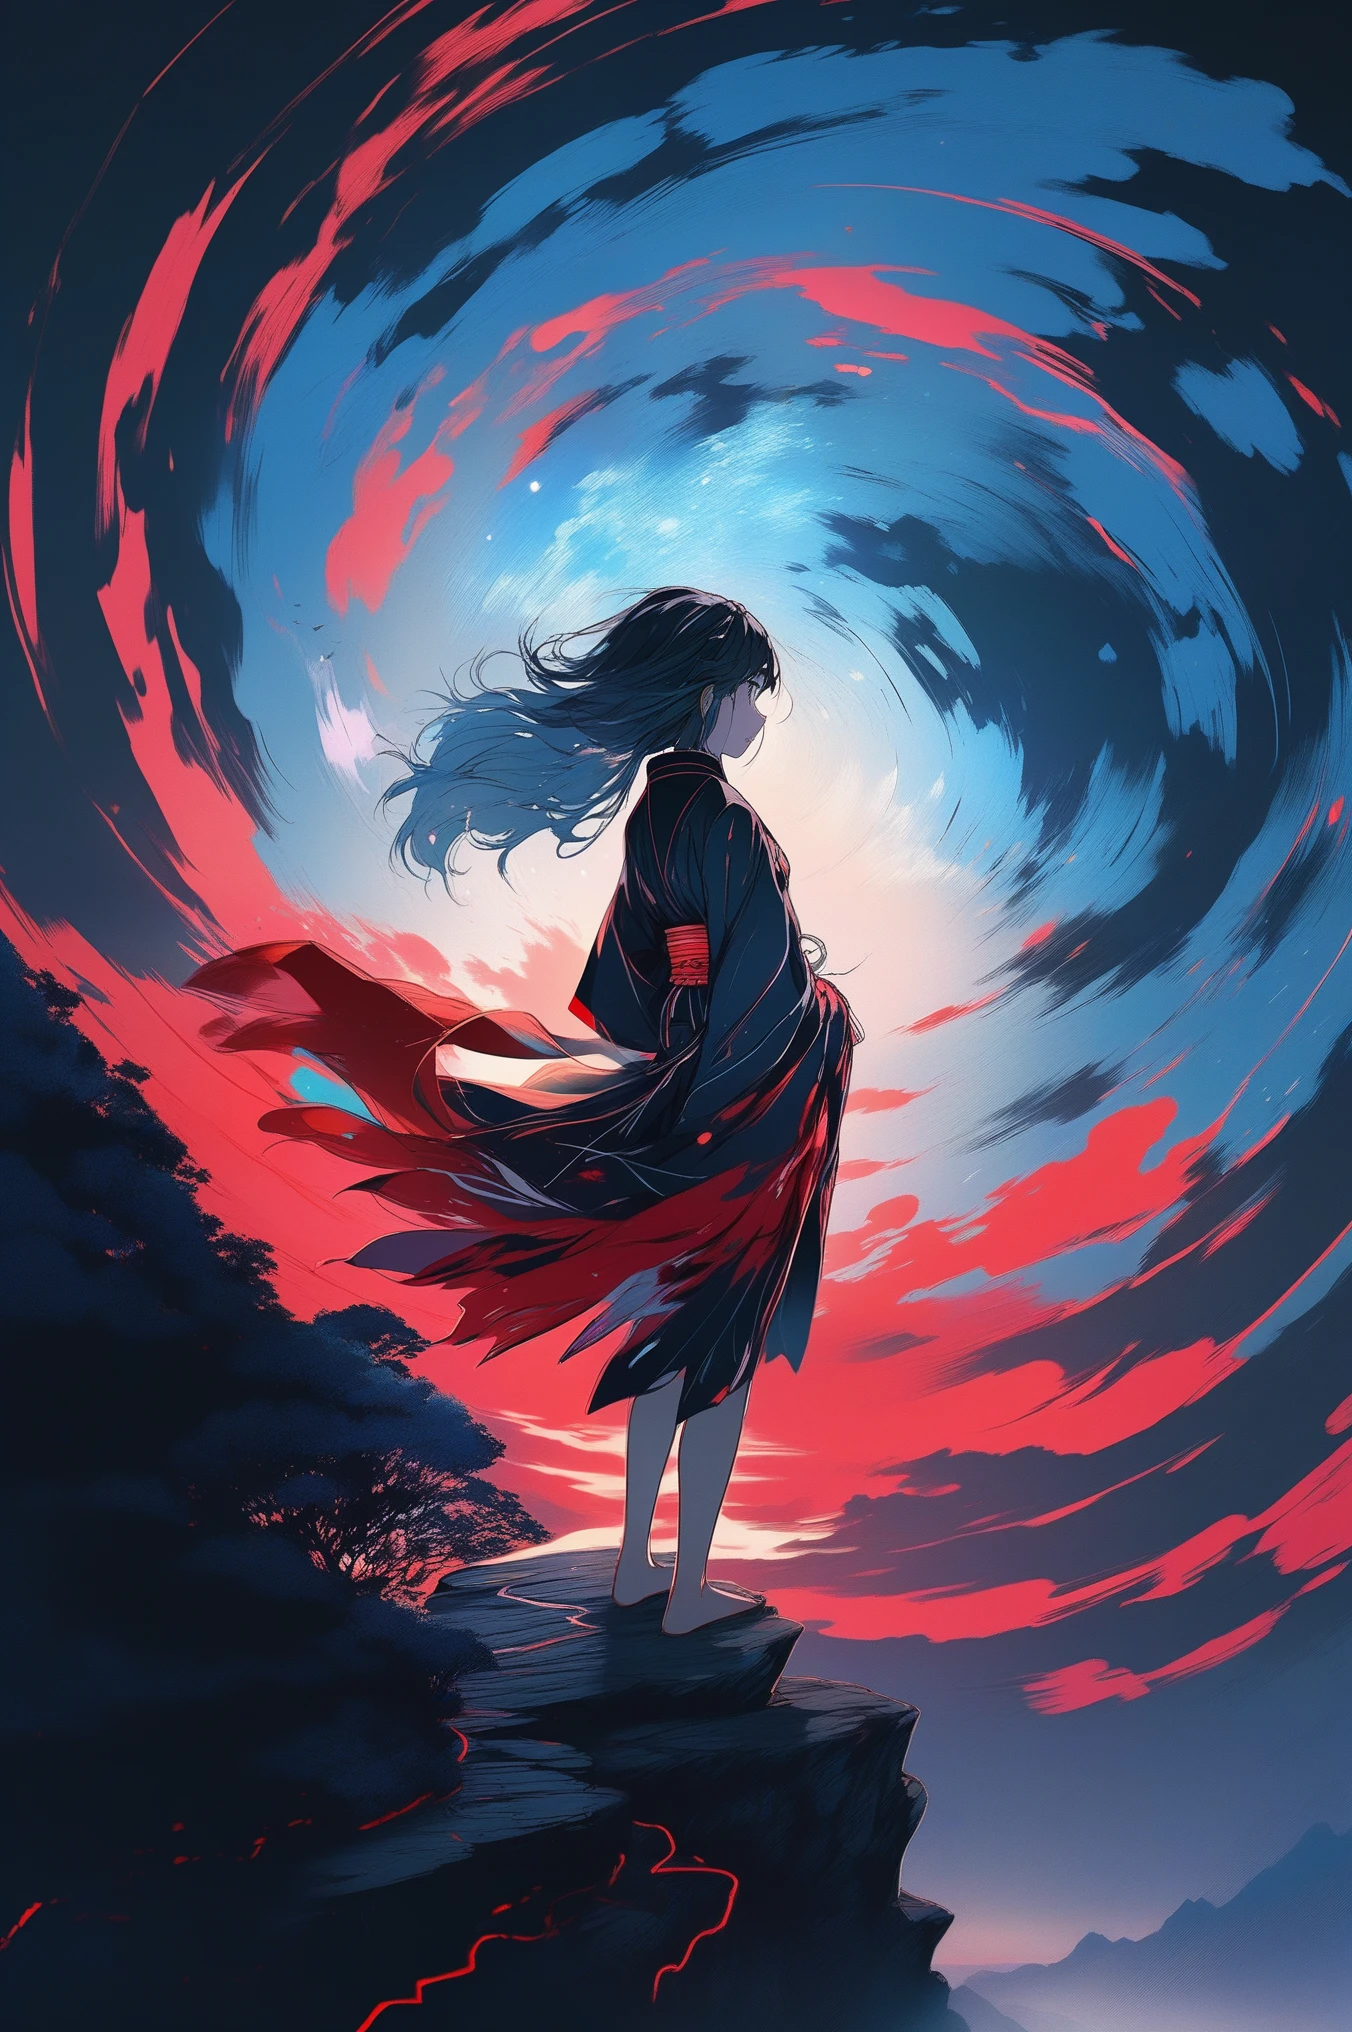 (best quality, sketch:1.2),realistic,illustrator,anime,1 girl, detailed lips, kimono,custom, black and red gradient background,neon hair,textured cropping, masterpiece, style retro classic, anime, a girl standing on a cliff looking at a spiral, cyberpunk art inspired by Yuumei, trending on pixiv, space art, makoto shinkai cyril rolando, cosmic skies. by makoto shinkai, dreamy psychedelic anime, beautiful anime scene, anime epic artwork, watching the sun set. anime, realism | beeple